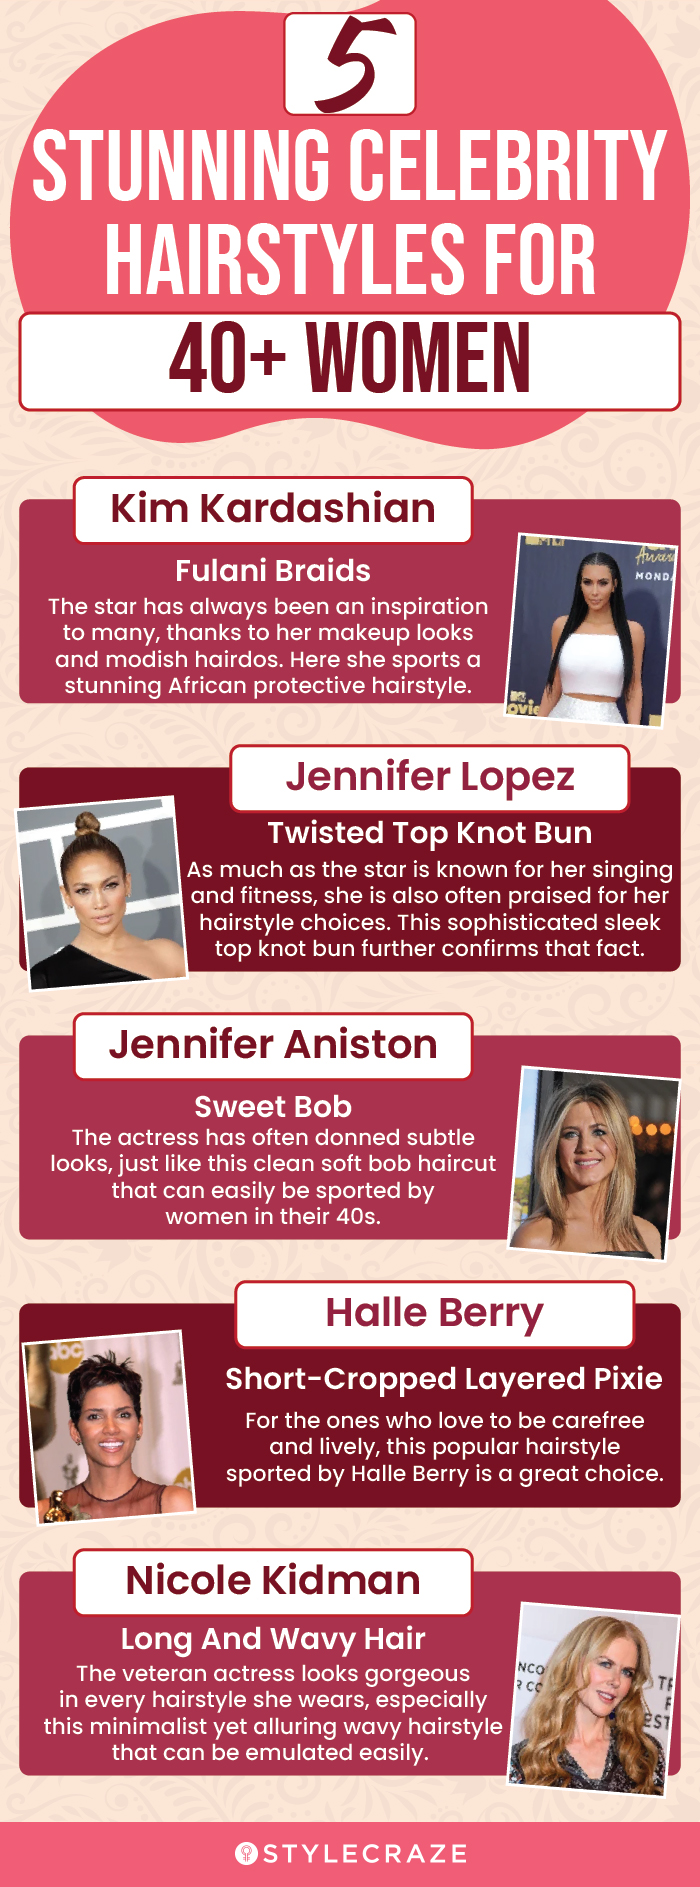 5 stunning celebrity hairstyles for 40+ women (infographic)